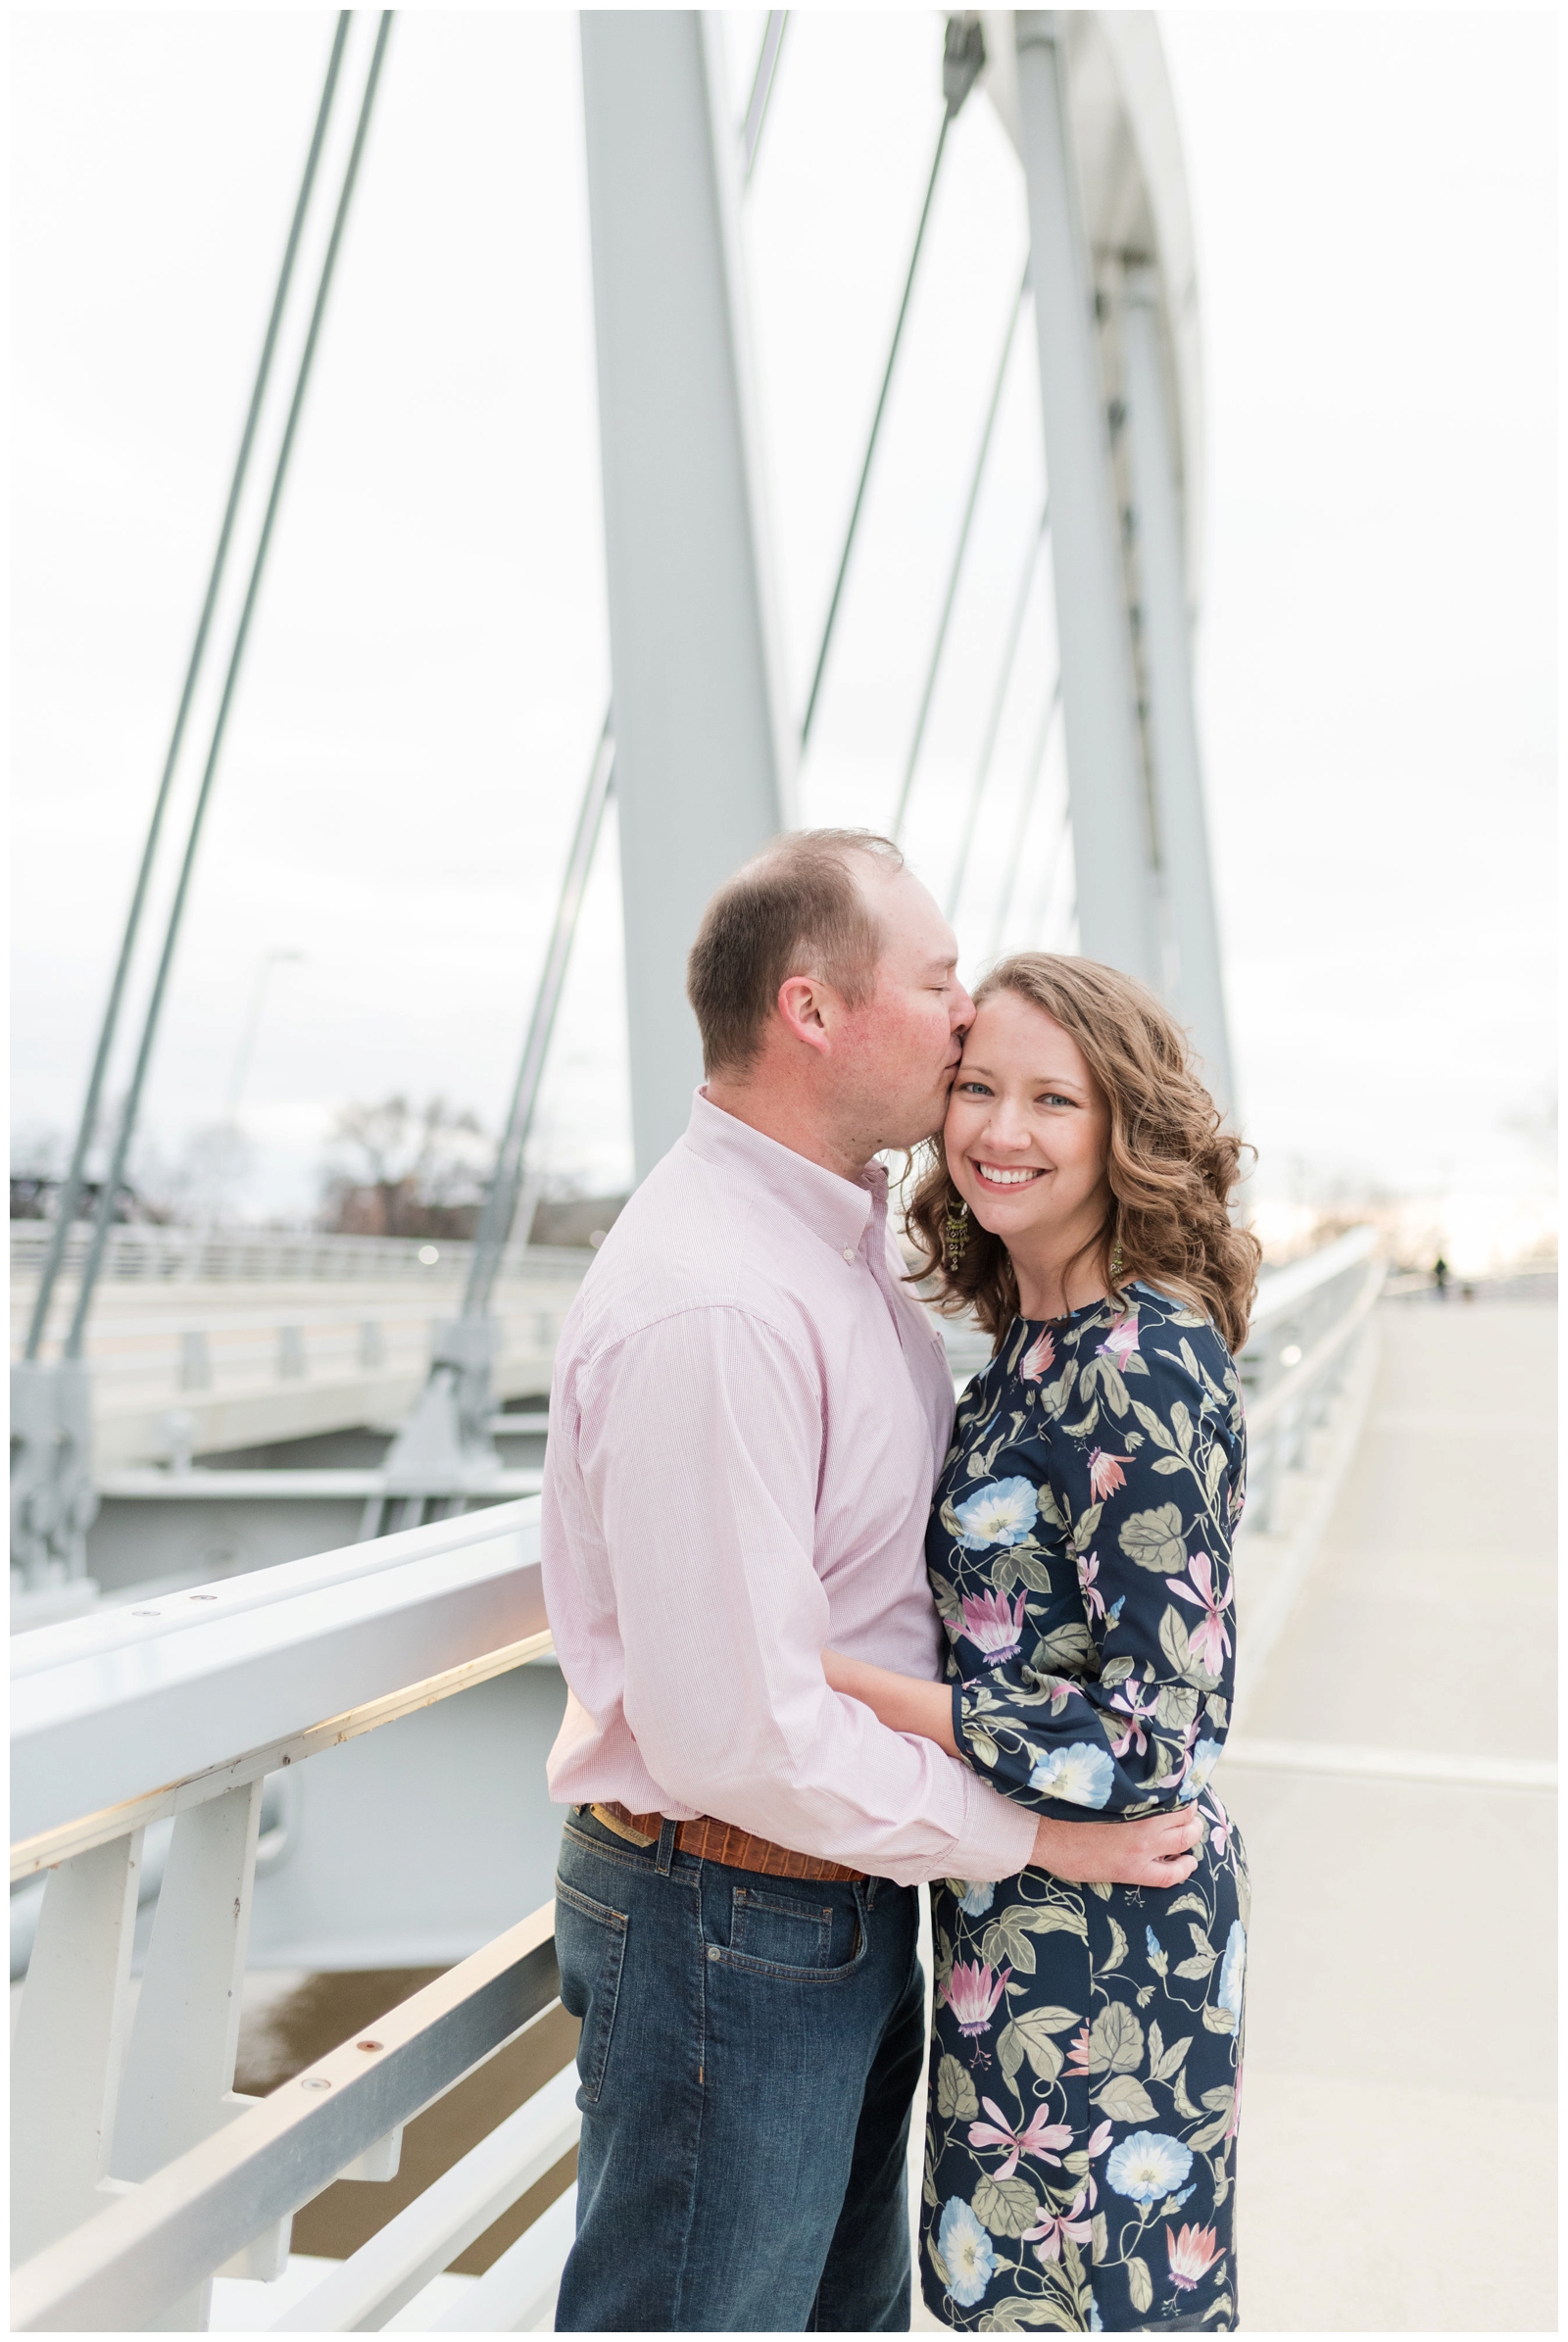 engaged couple stands on bridge at scioto mile. The man is in a pink shirt kissing the girl in a pink and navy floral dress. She is smiling at the camera 